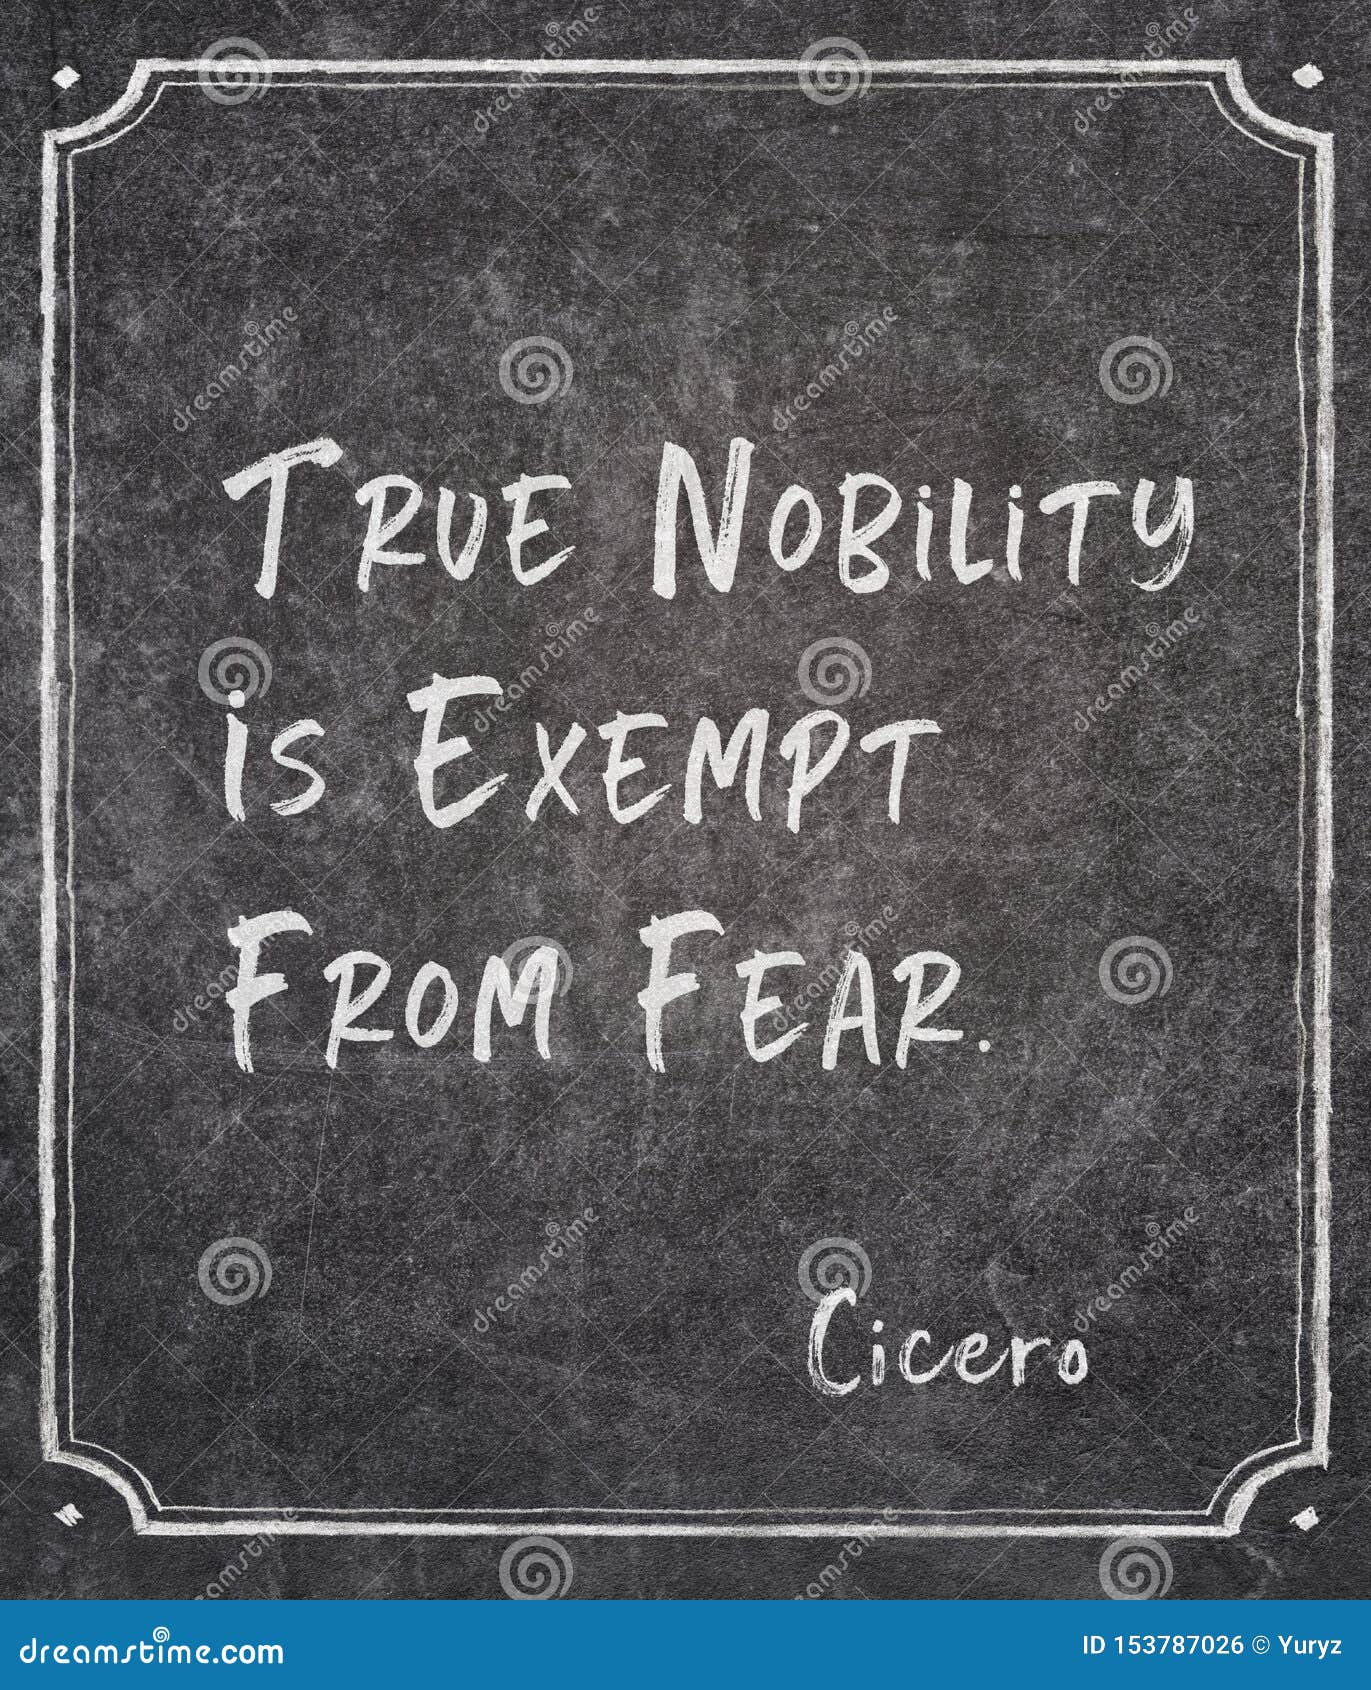 exempt from fear cicero quote